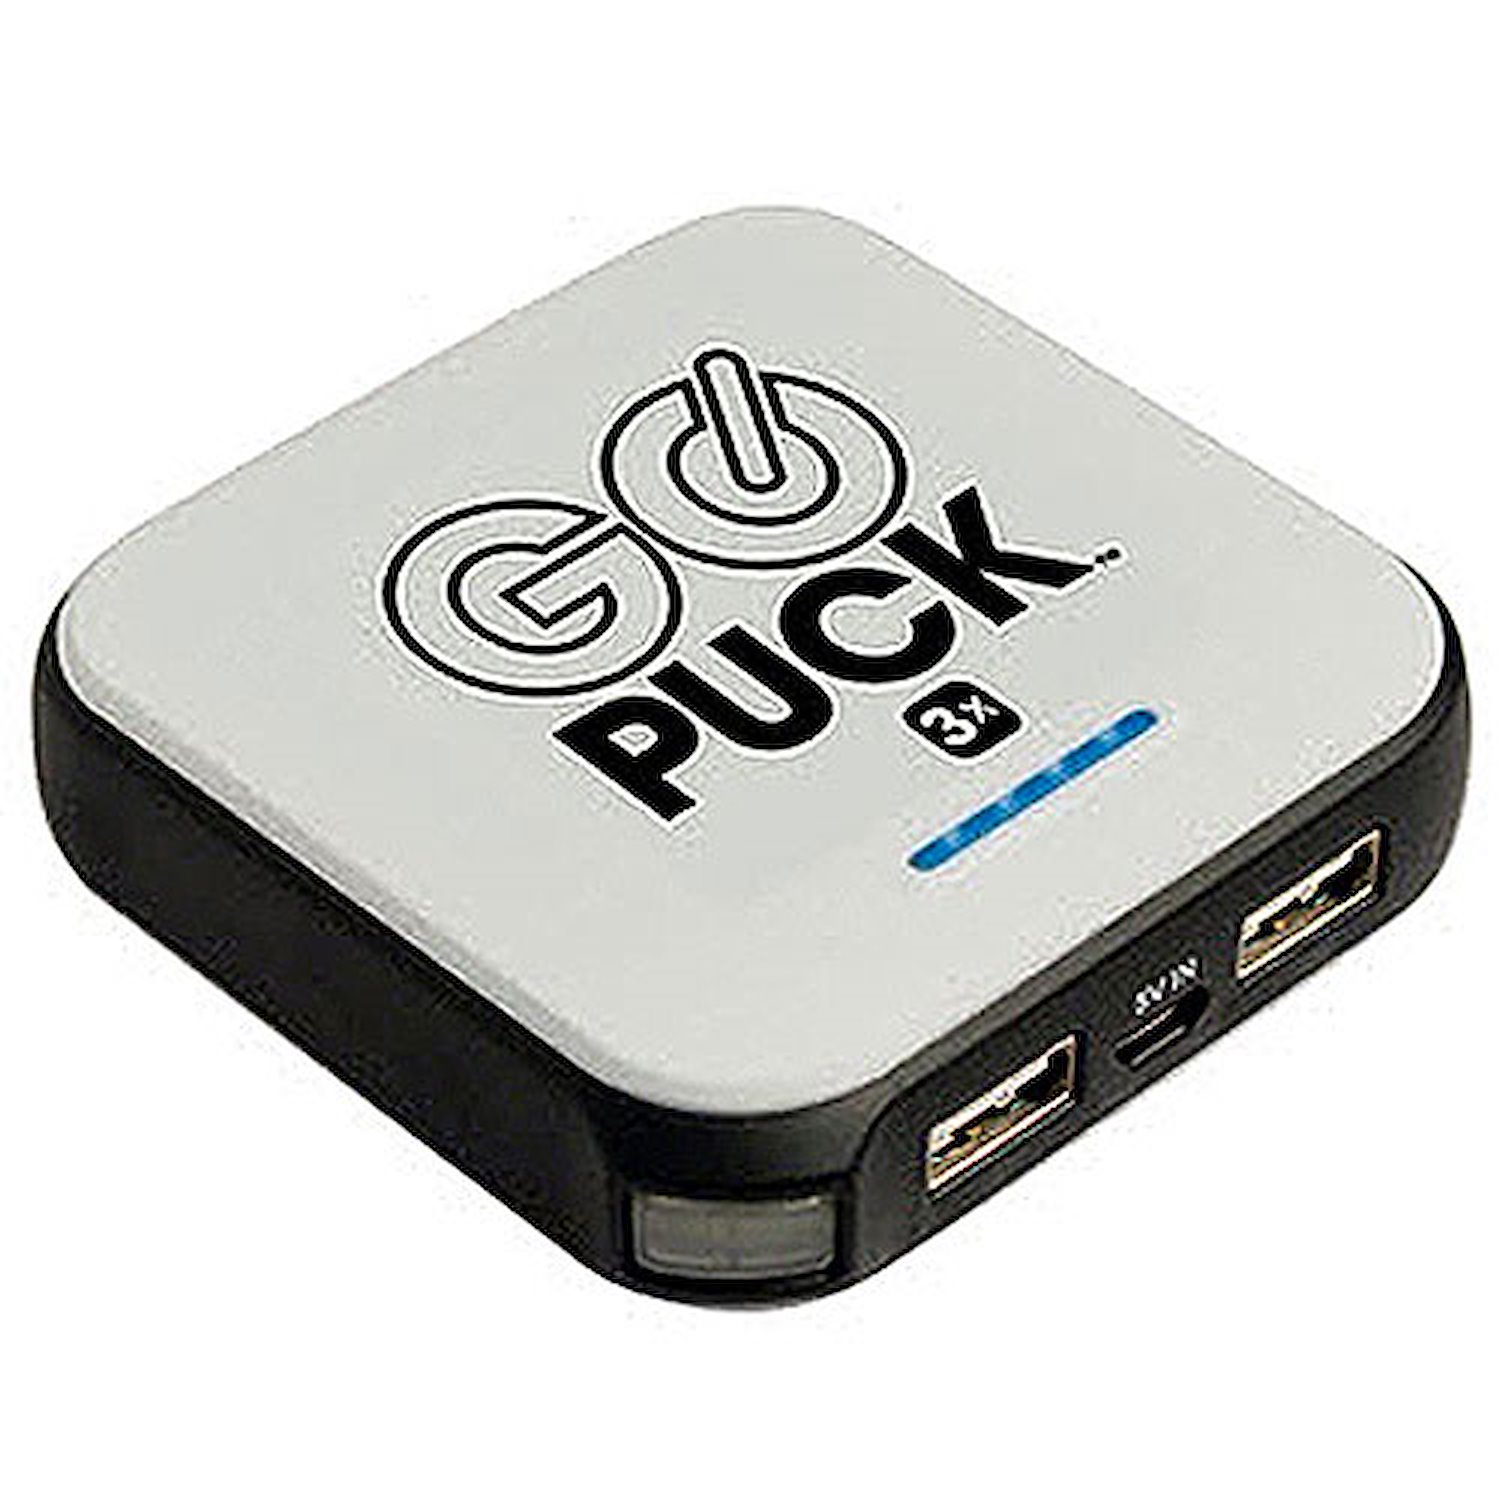 GO PUCK 3x Portable Lithium Ion USB Charger 4400 mAh